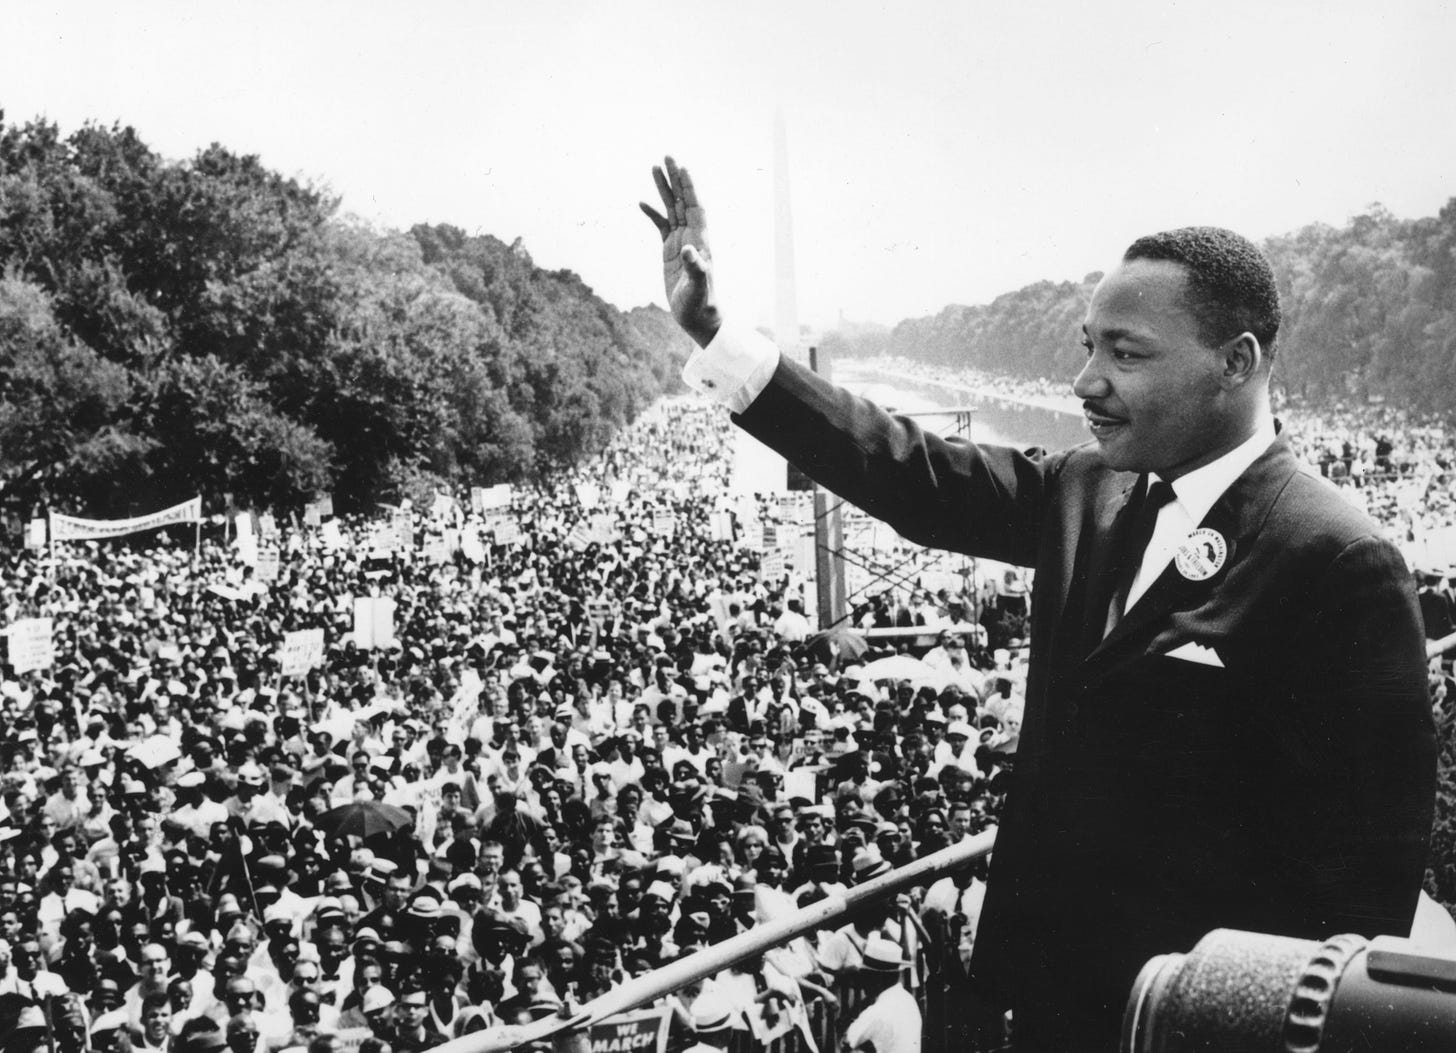 PHOTOS: The Legacy of Dr. Martin Luther King Jr. | KRQE News 13